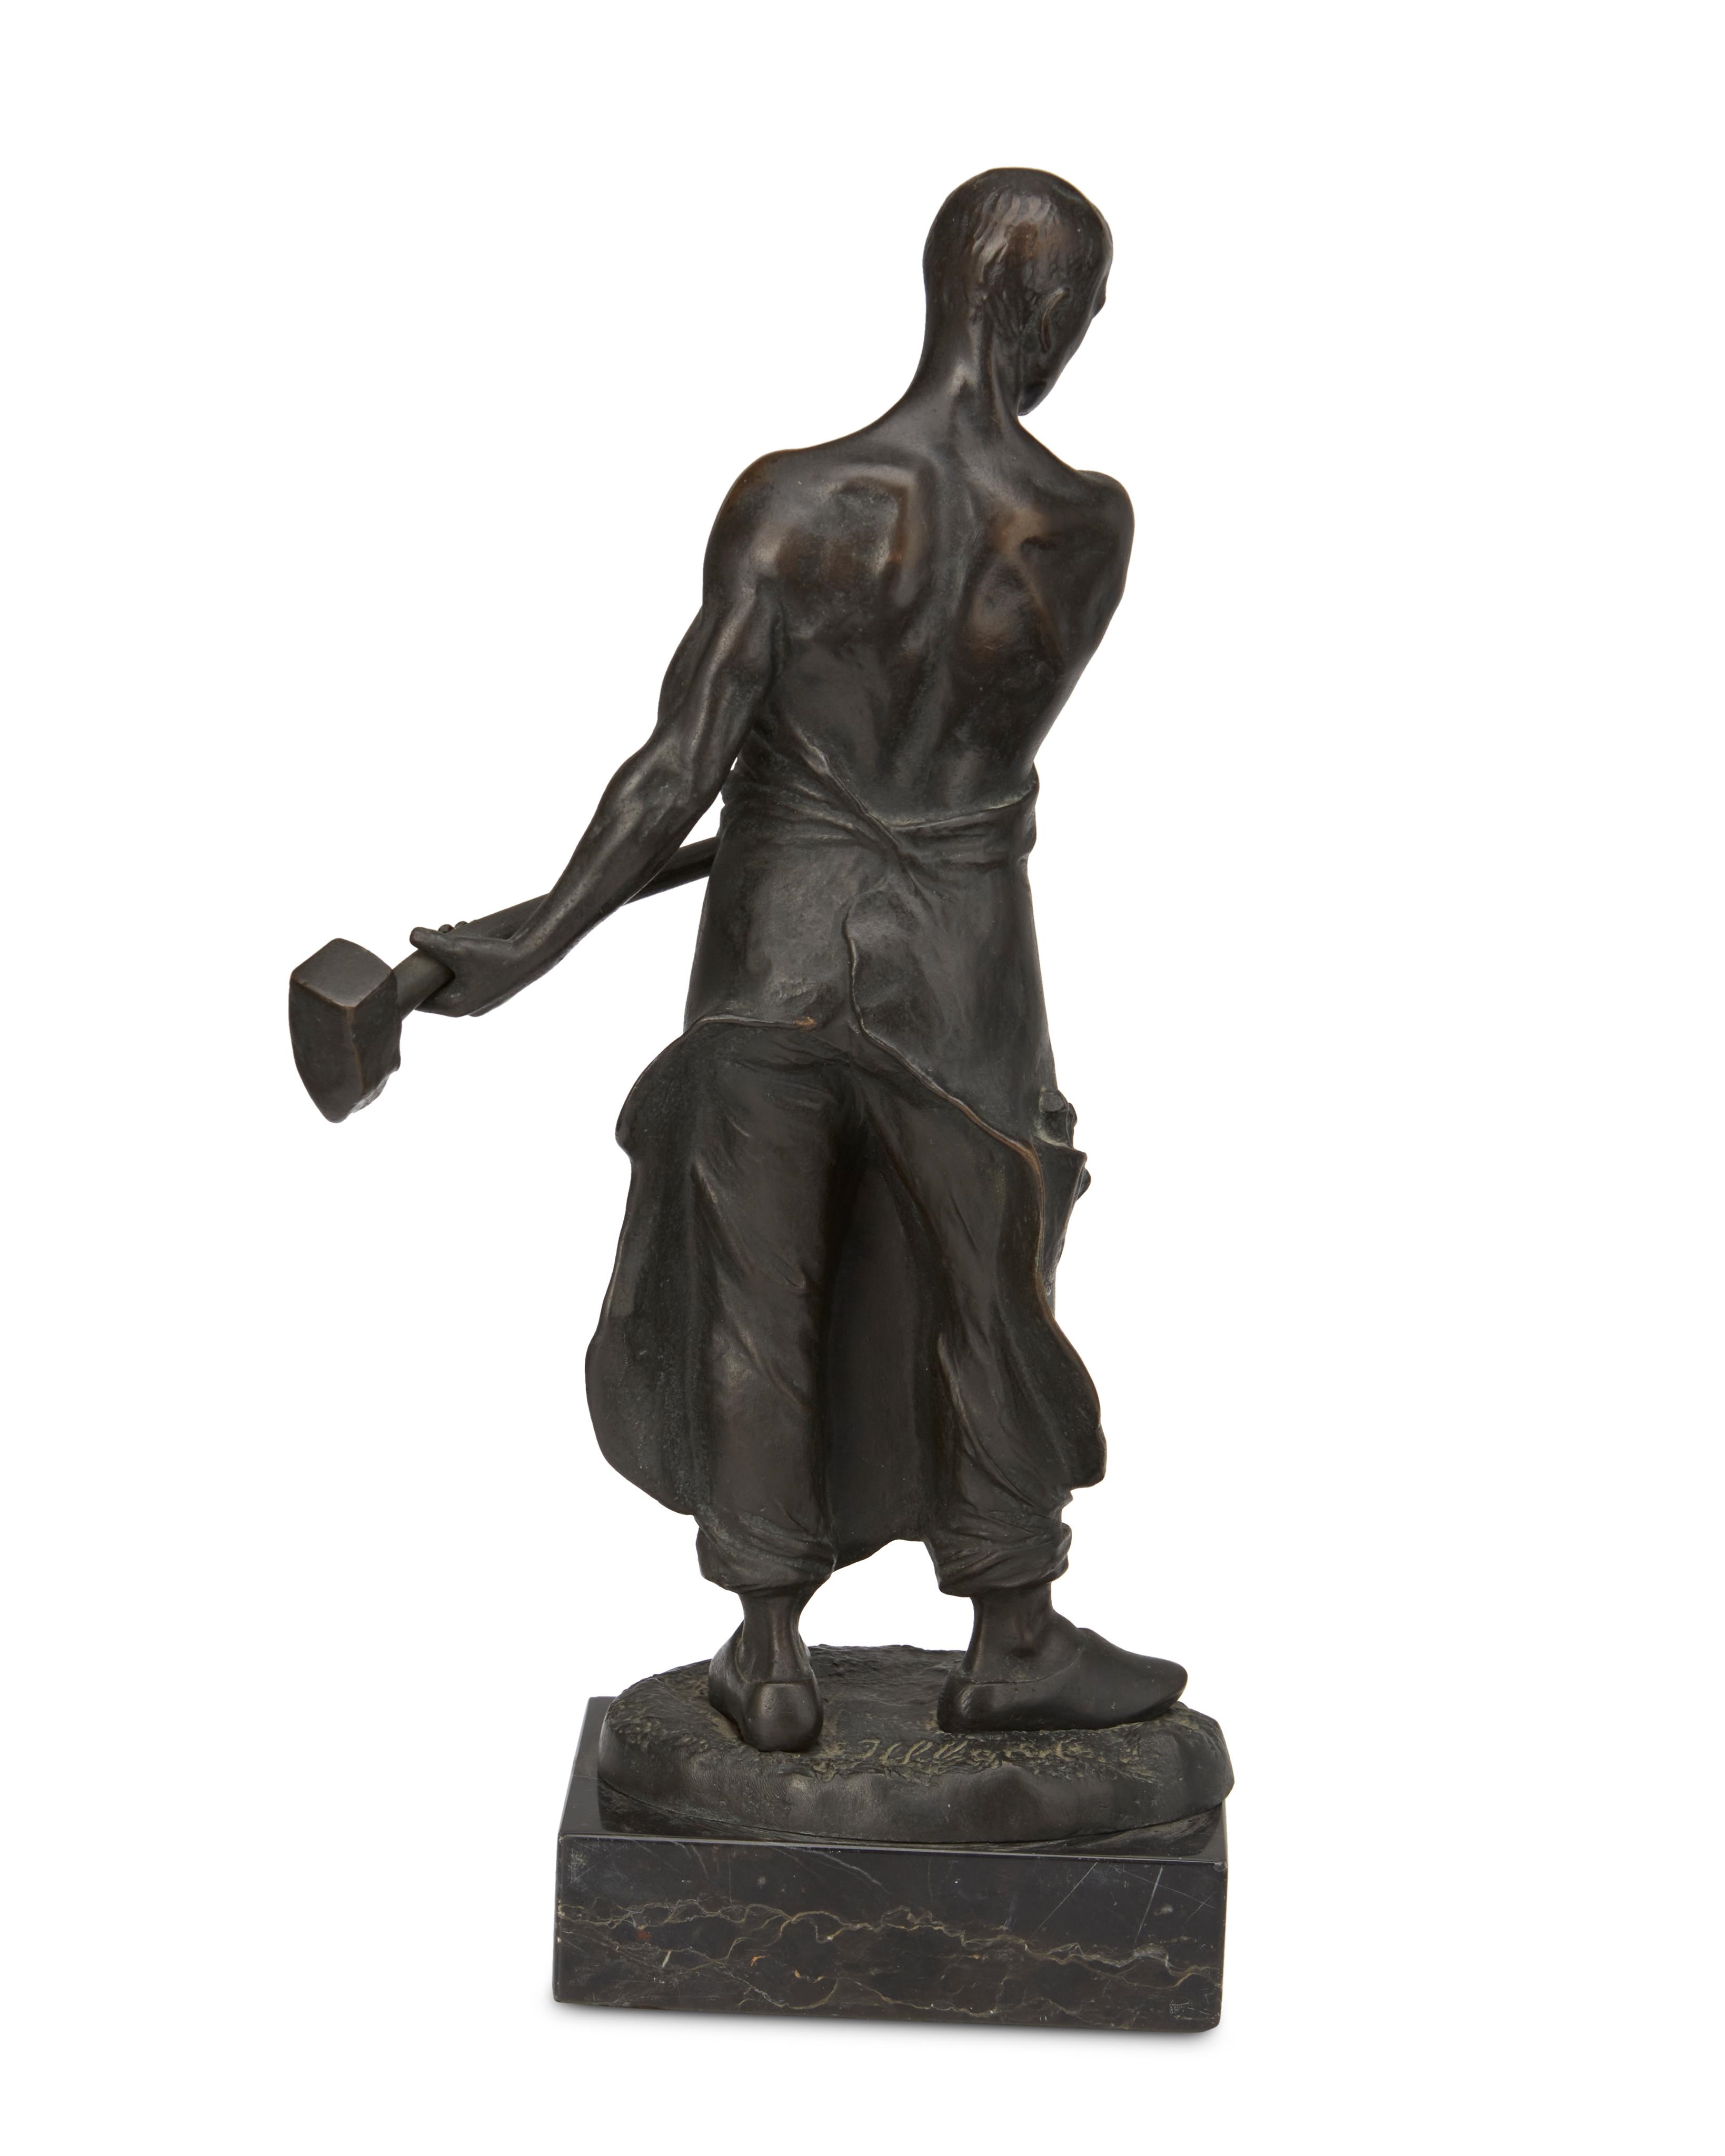 Artwork by Frans Iffland, "Stehender Schmied mit Hammer", Made of Patinated bronze with marble plinth